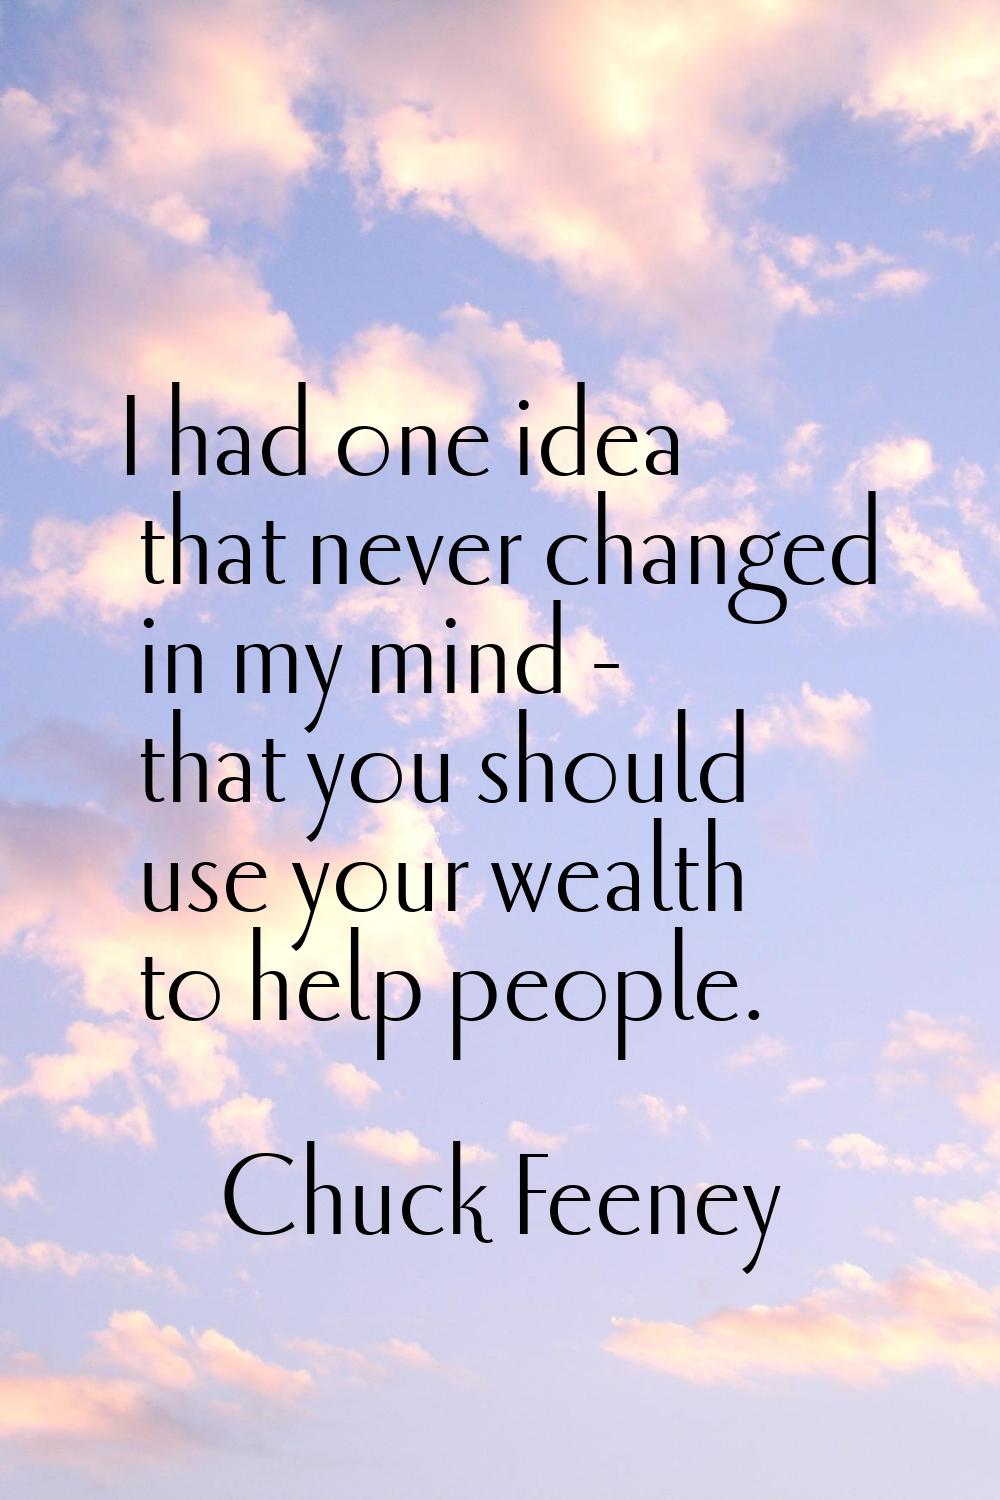 I had one idea that never changed in my mind - that you should use your wealth to help people.